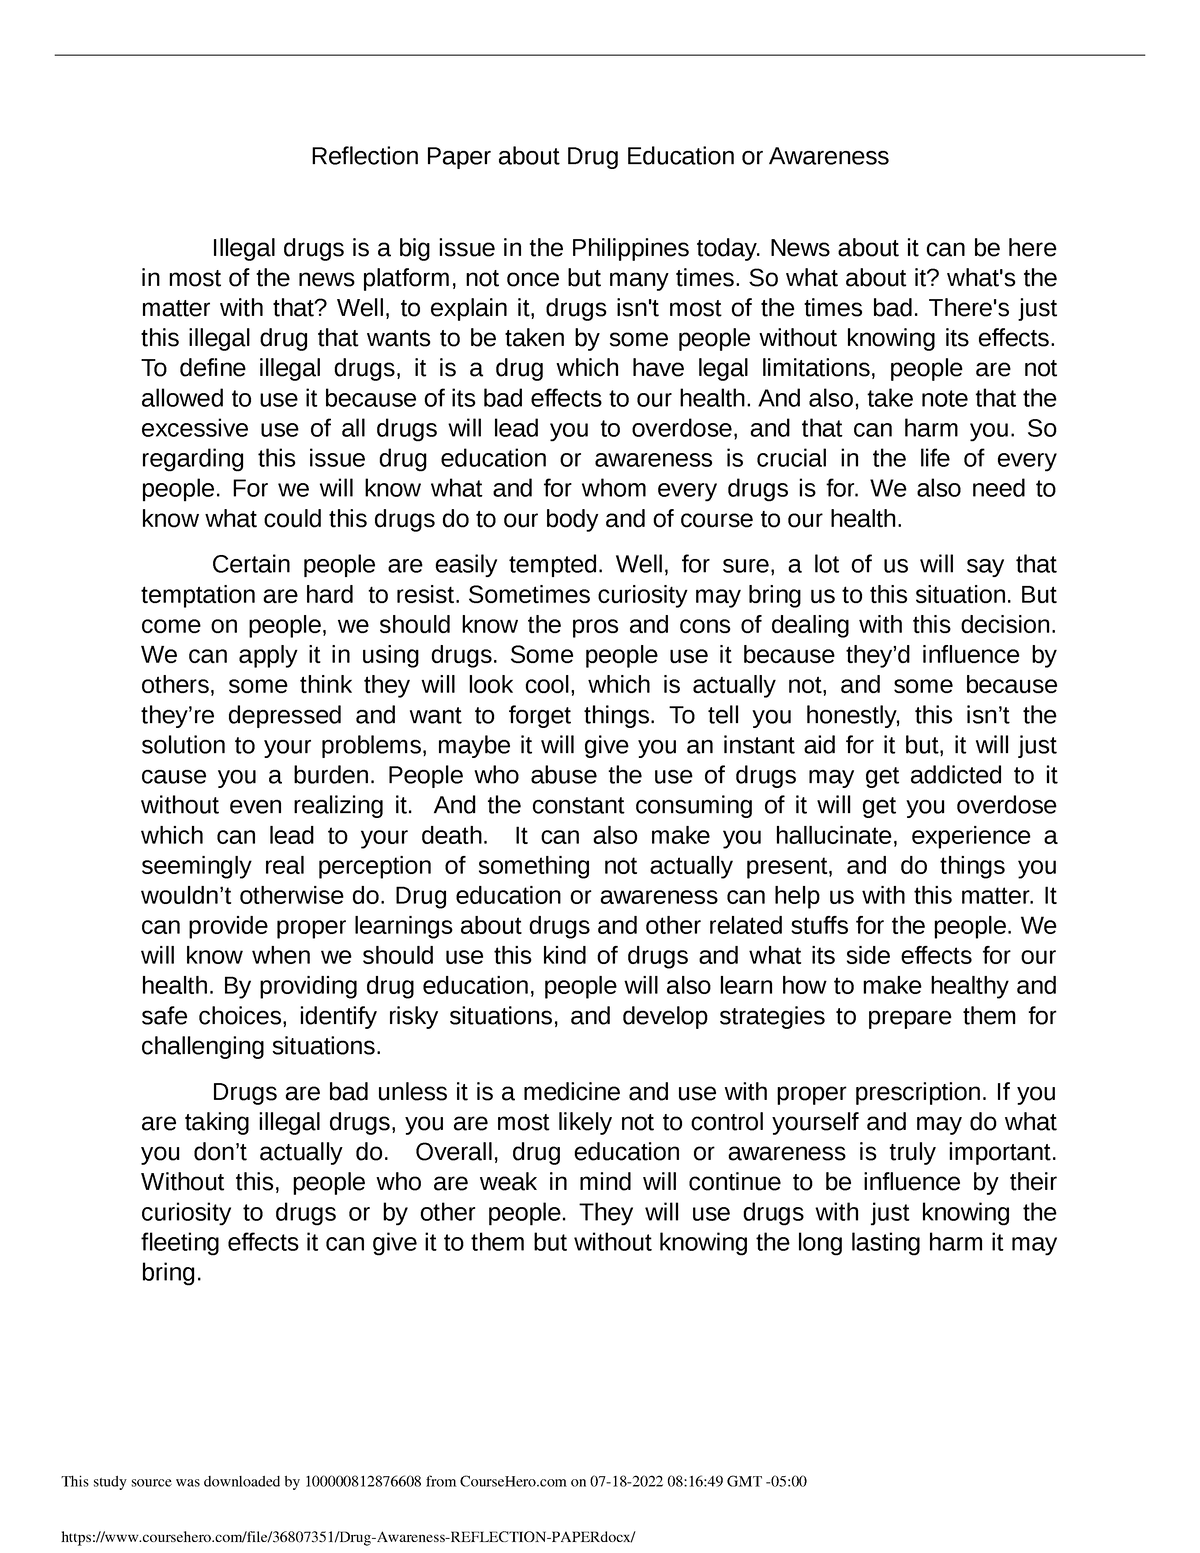 example of reflection paper about drug education